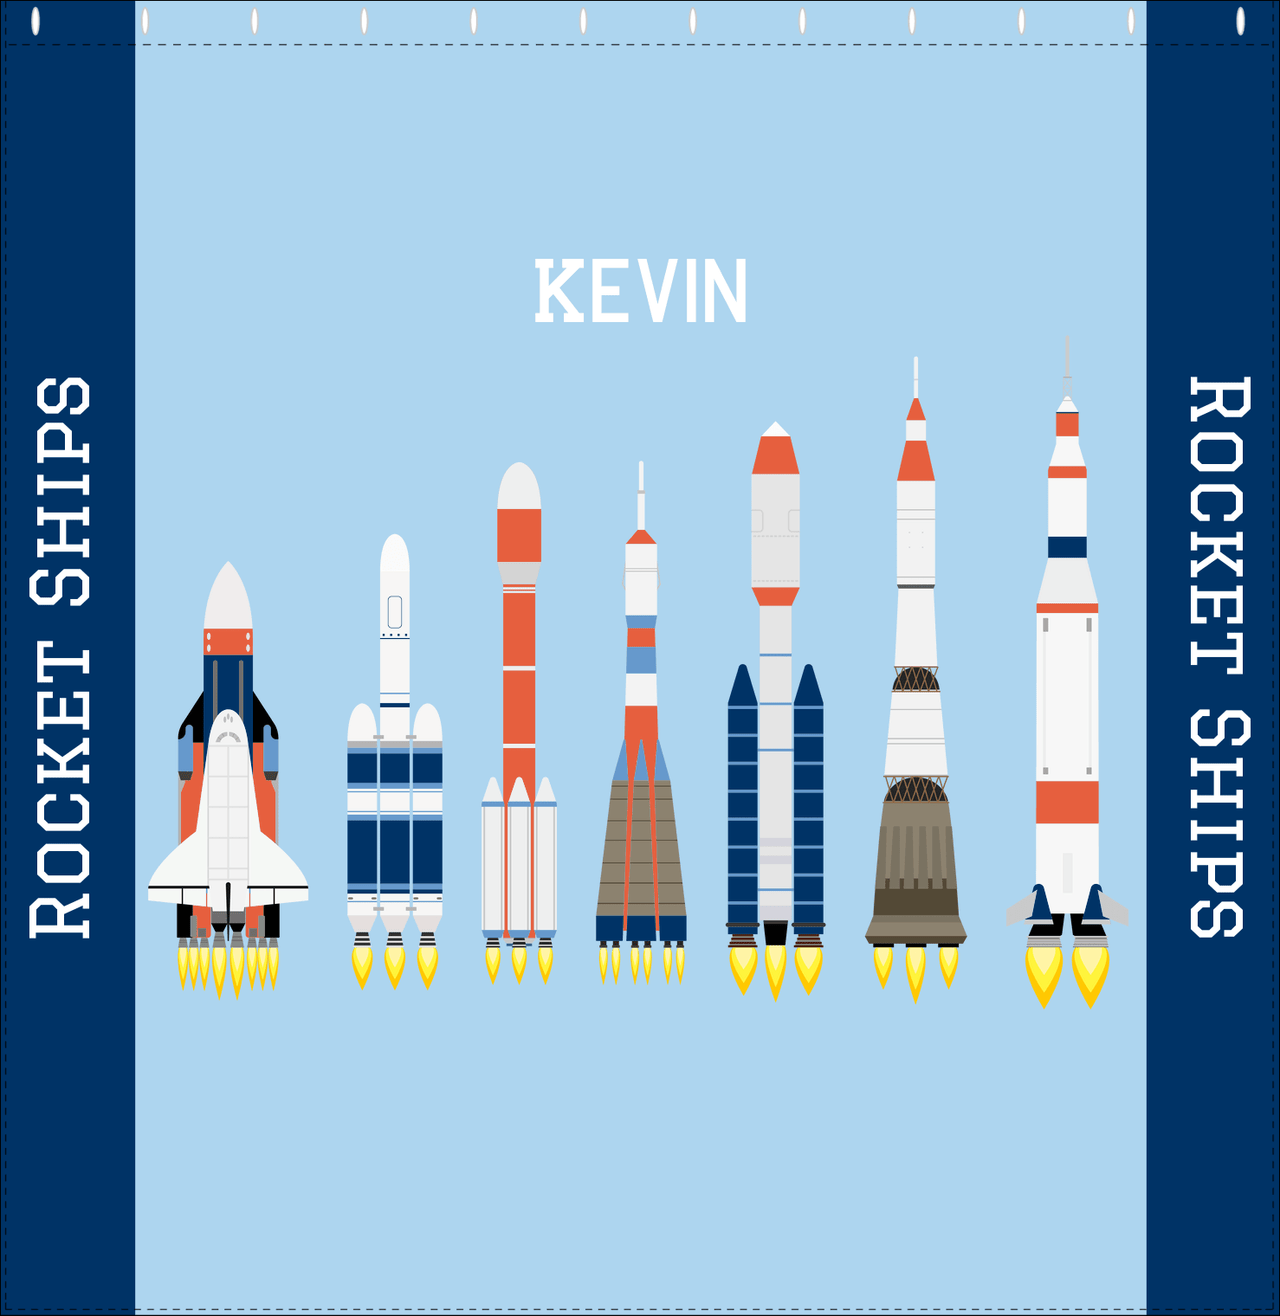 Personalized Rocket Ship Shower Curtain VIII - Blue Background - Decorate View